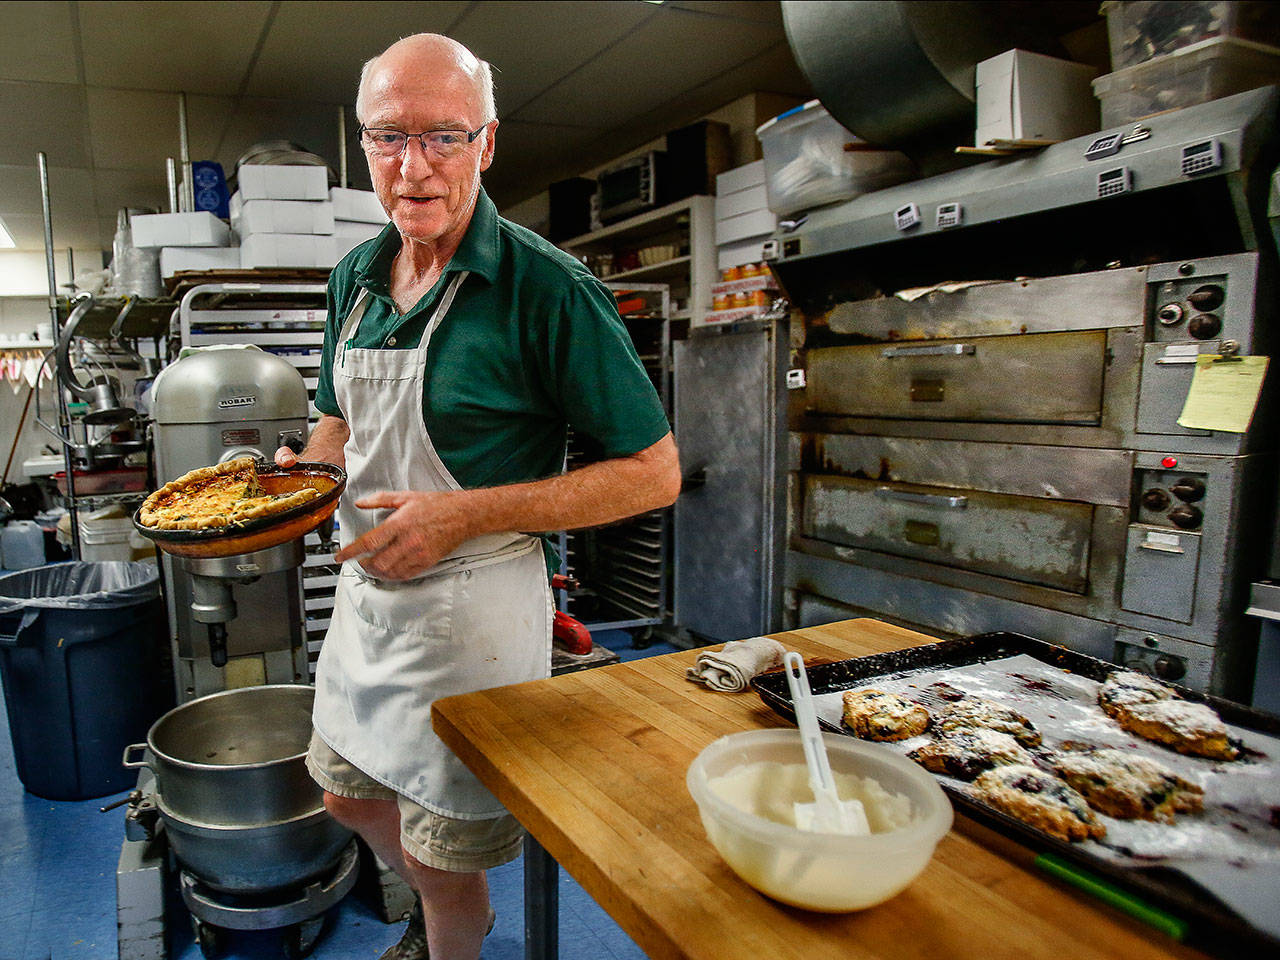 Andrew Abt goes back and forth from the kitchen to the sales counter at Monroe’s Sky River Bakery on Tuesday. He and his wife, Mary Thorgerson, would like to sell the bakery and retire. (Dan Bates / The Herald)